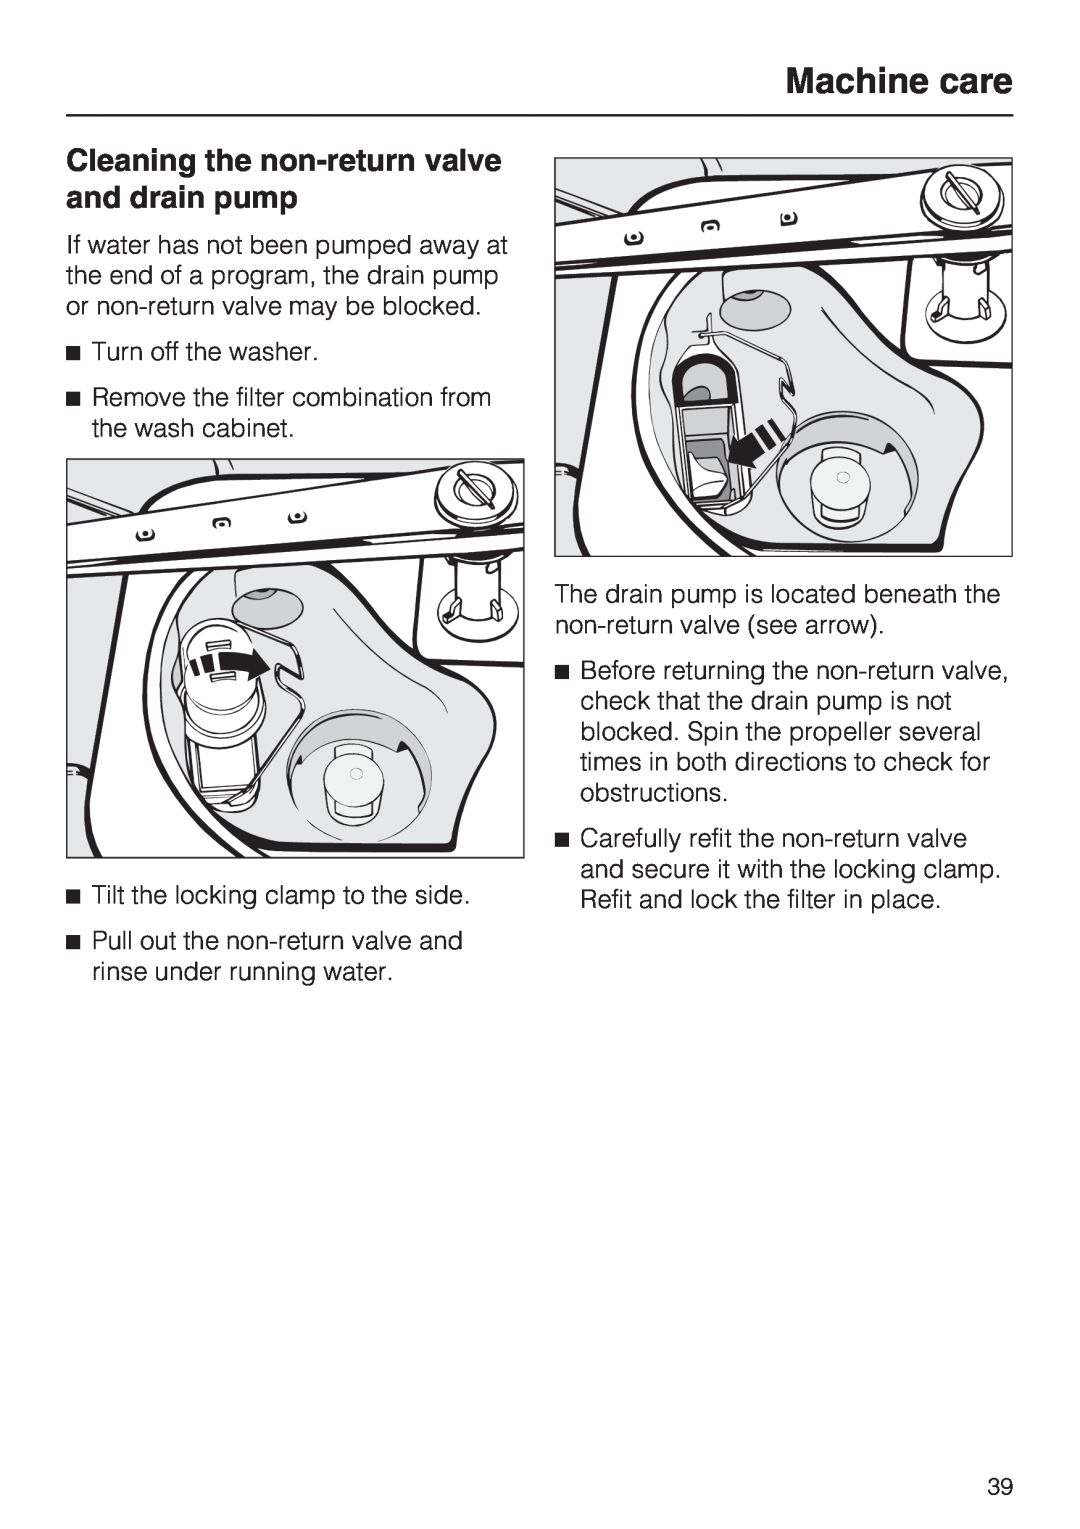 Miele 06 868 521, G 7856 installation instructions Cleaning the non-returnvalve and drain pump, Machine care 